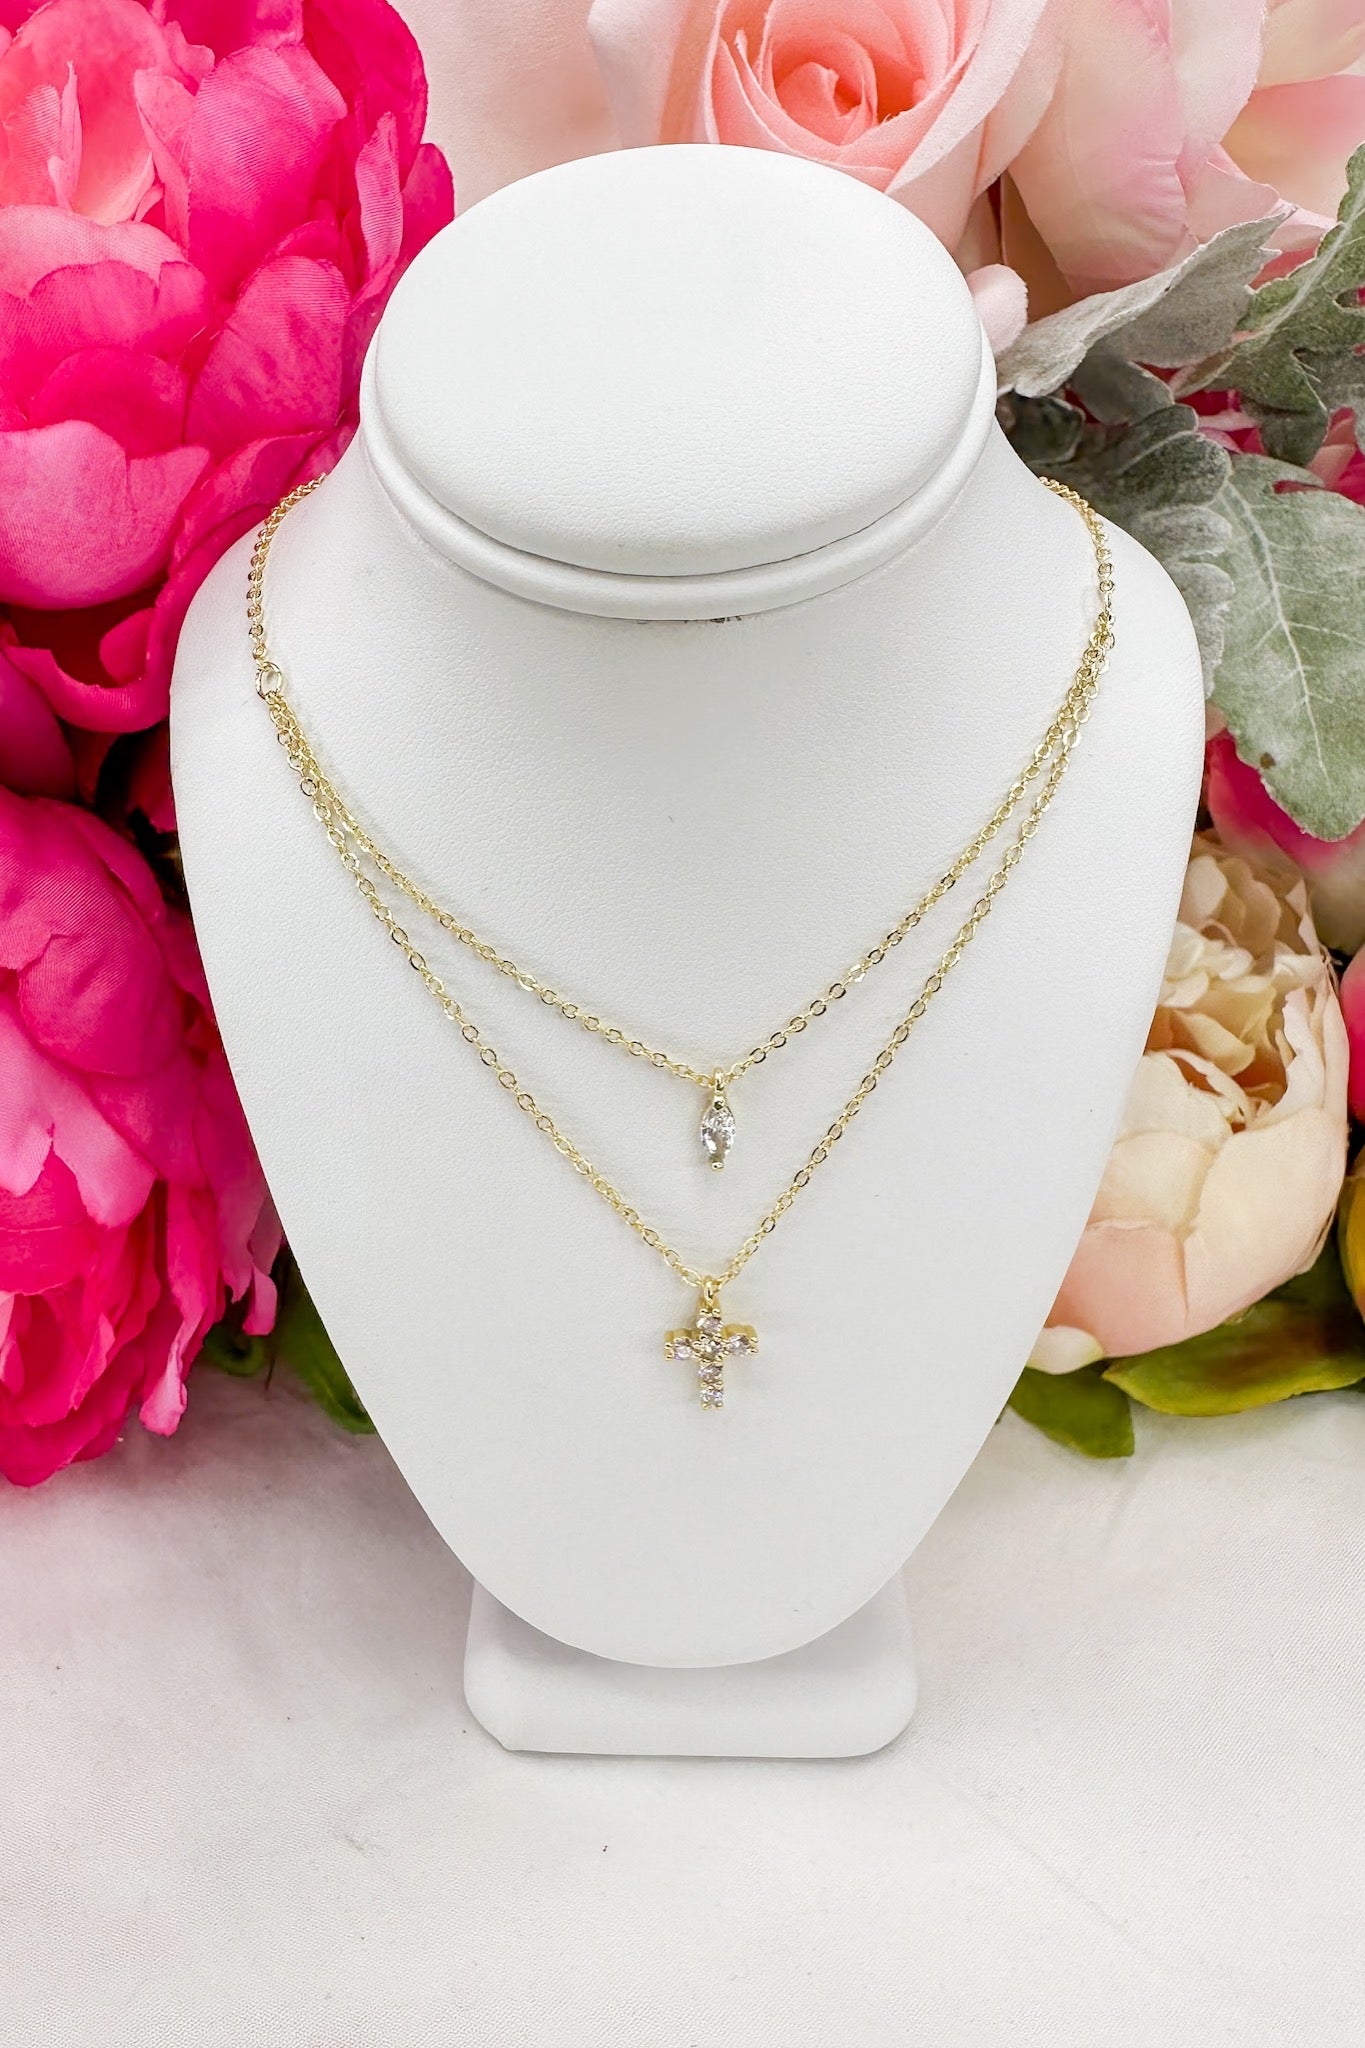 Petite Serenity Layered Necklace by Treasure Jewels